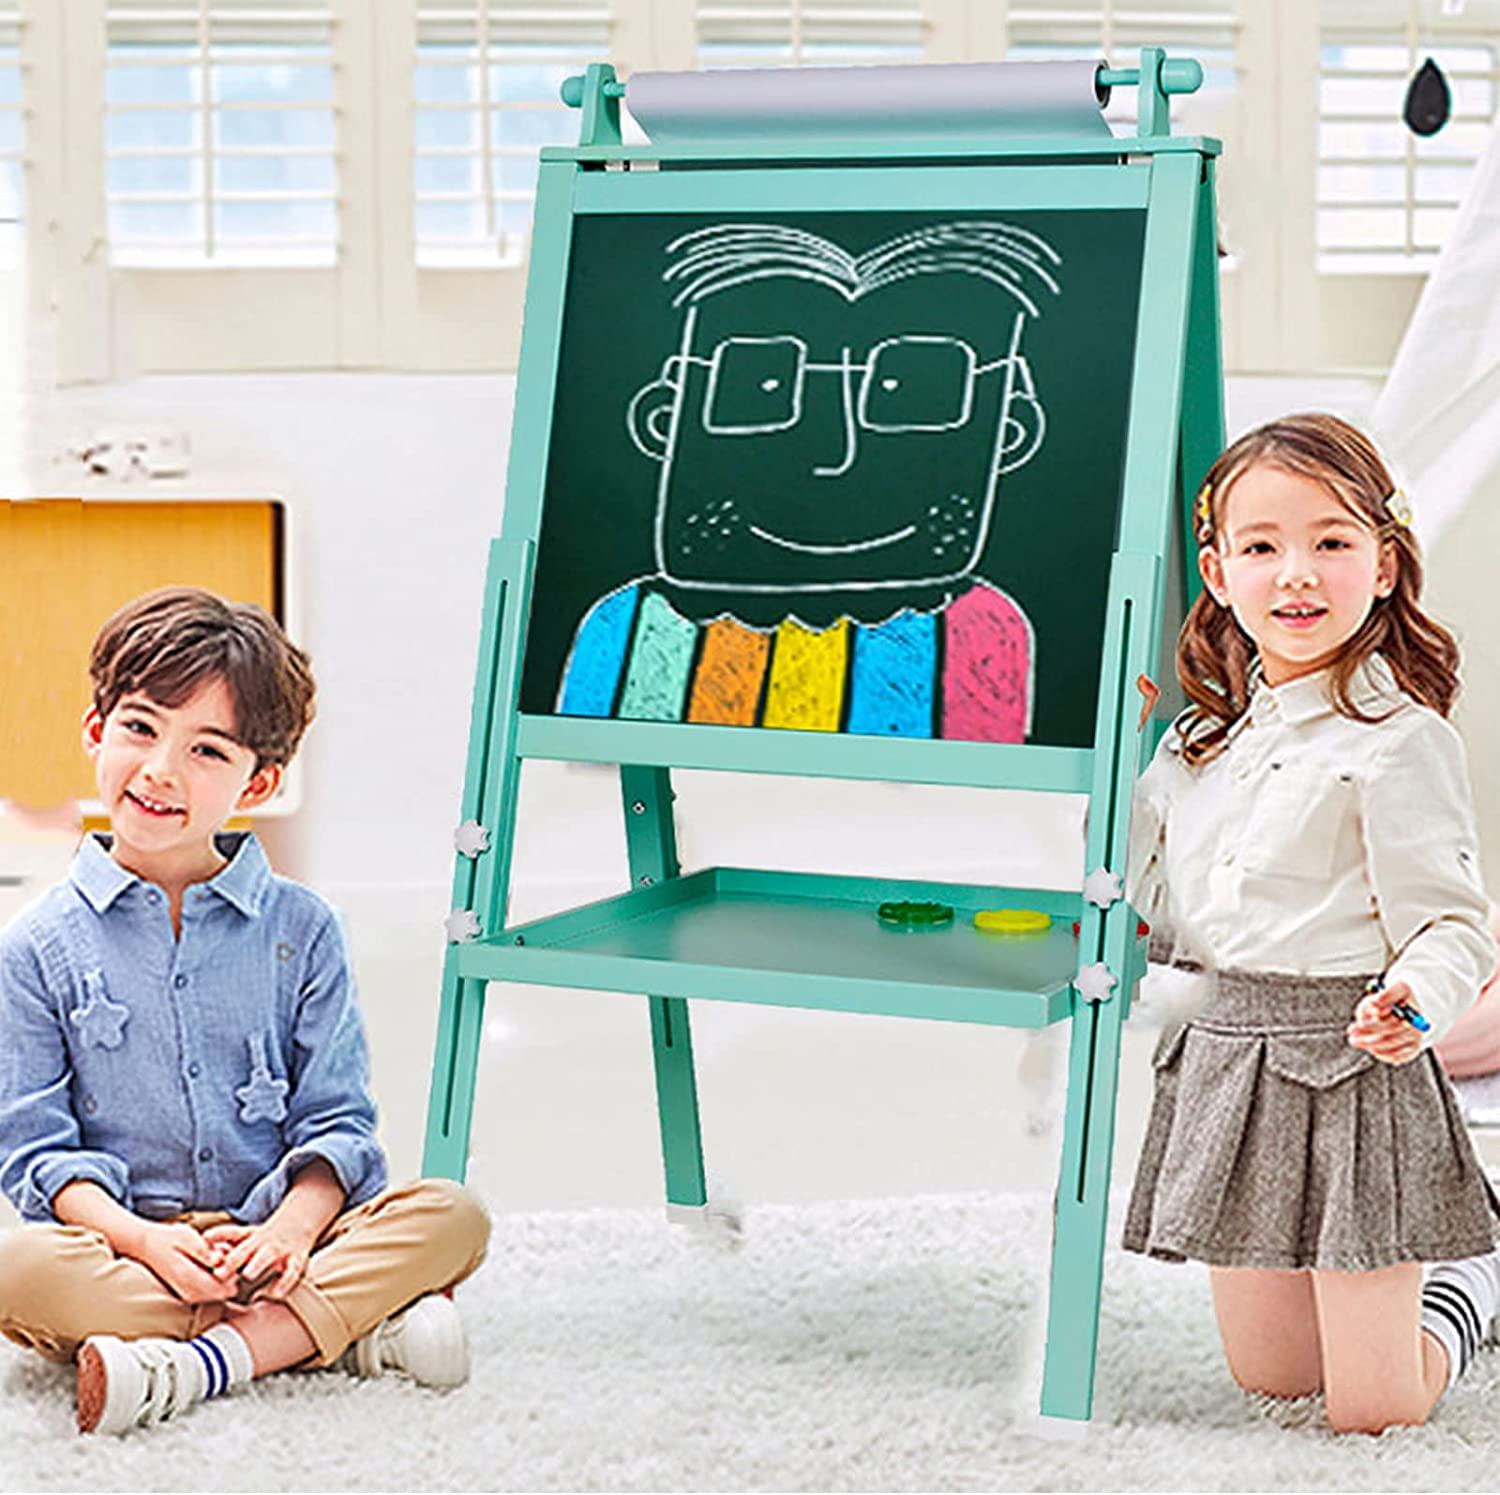 Ejoyous Kid’s Wooden Art Easel Double-Sided Wooden Children Art Easel with Magnetic Snap Eraser Set Gift*6 3 in1 Blackboard And Whiteboard for Toddlers and Kids